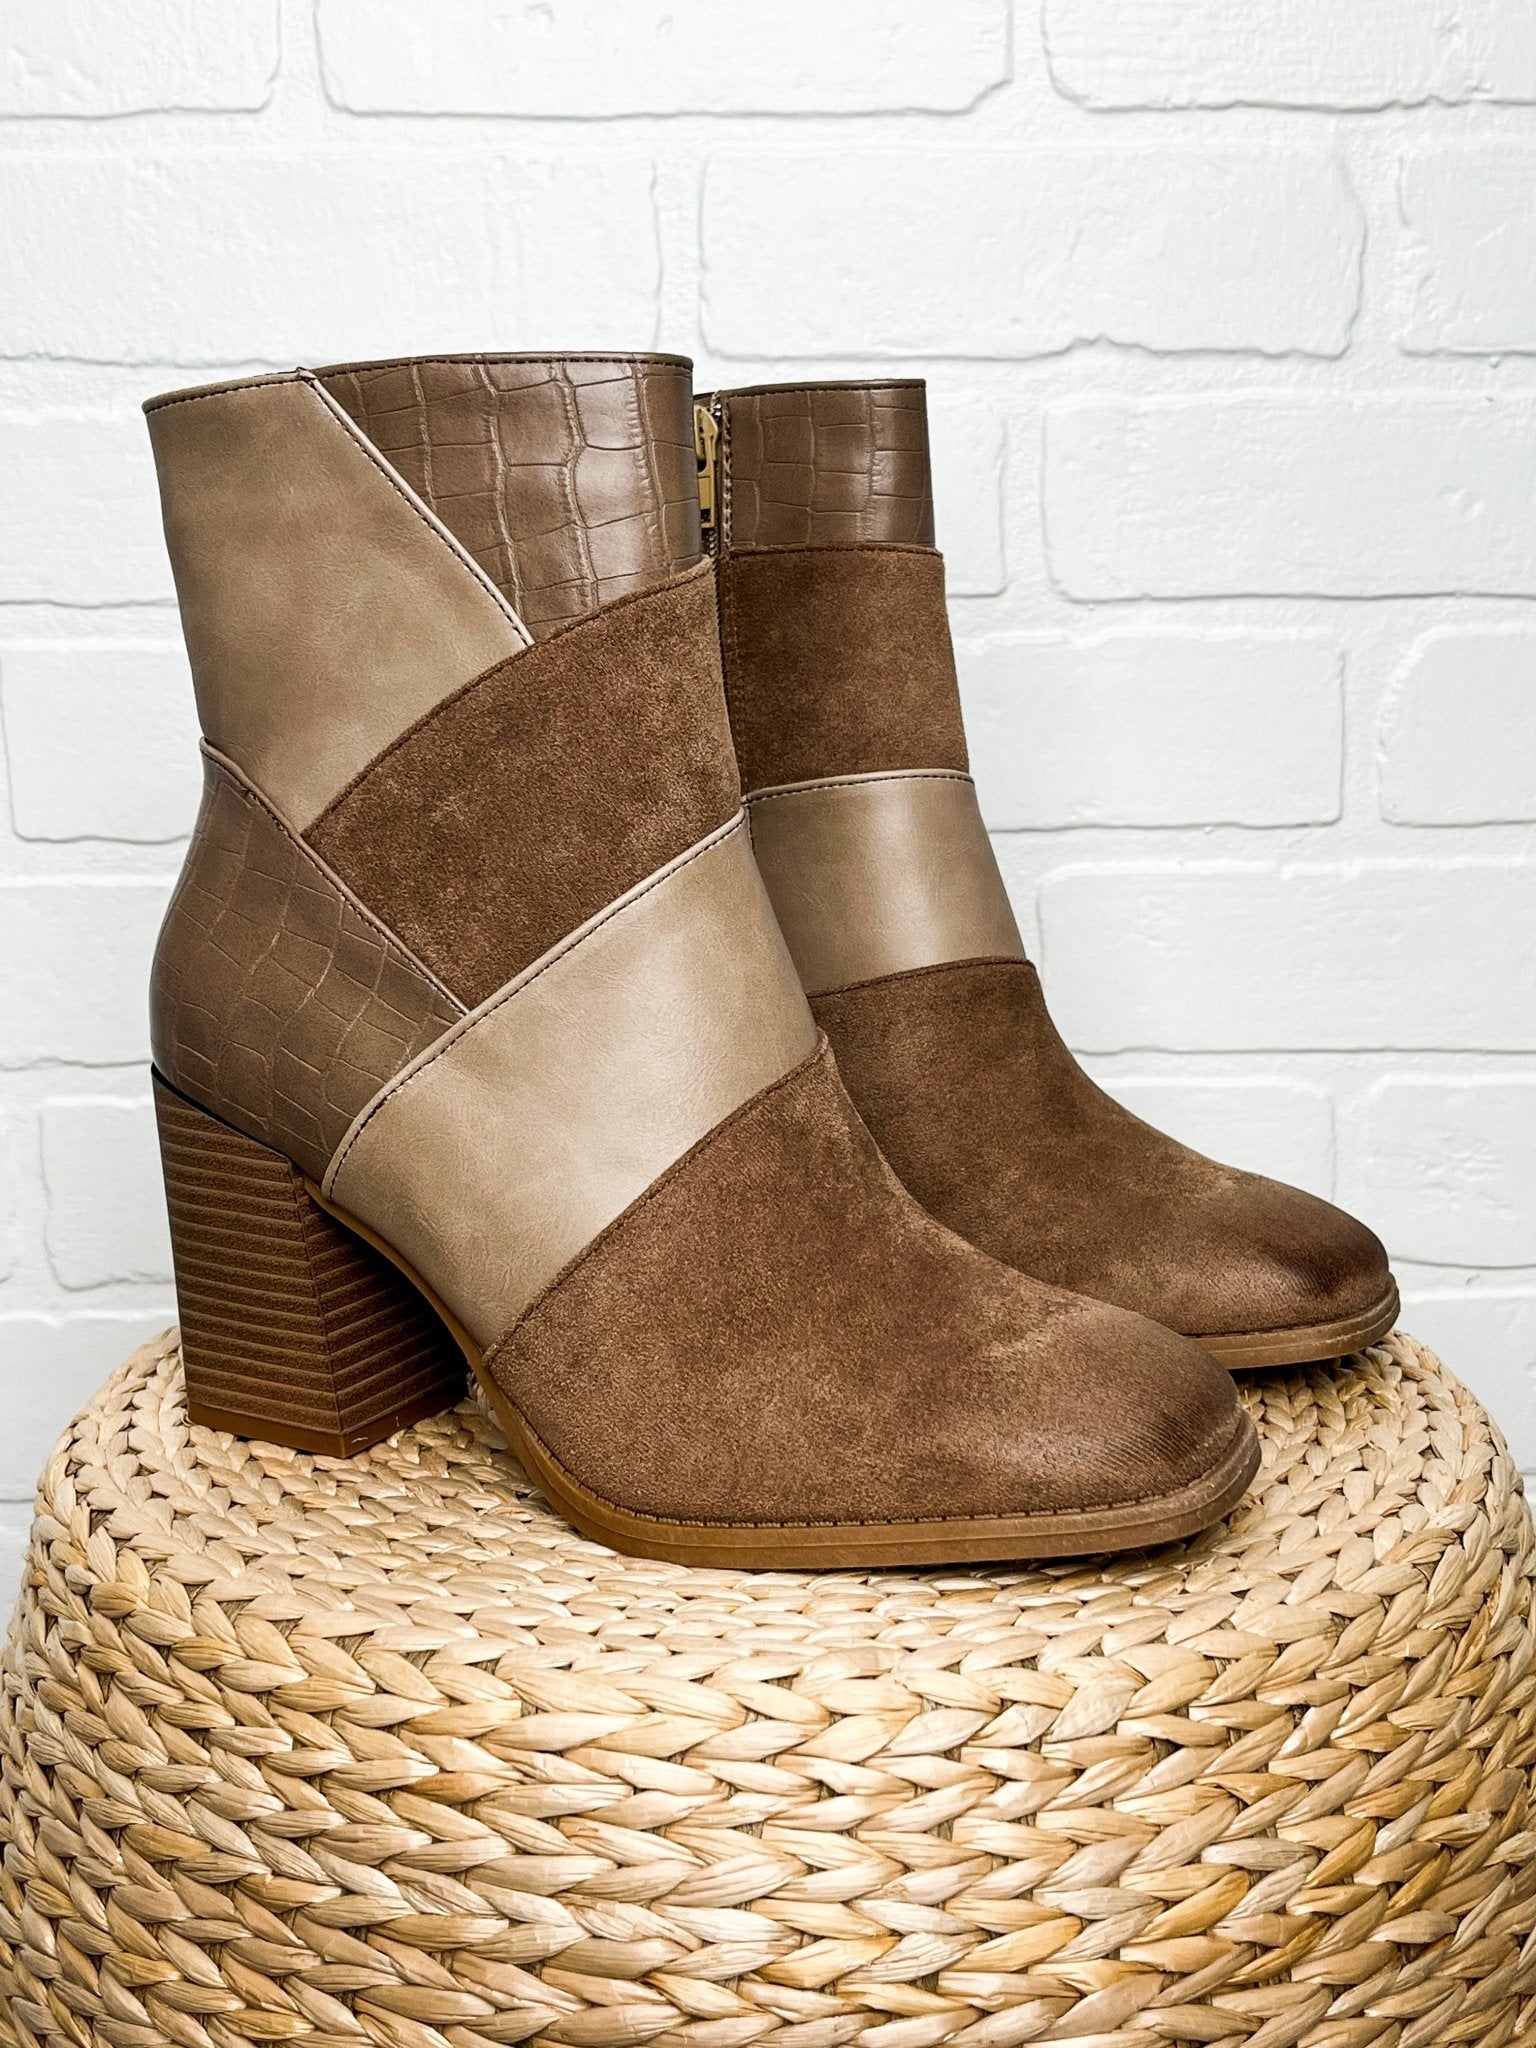 Cammy patchwork bootie taupe - Trendy Shoes - Fashion Shoes at Lush Fashion Lounge Boutique in Oklahoma City